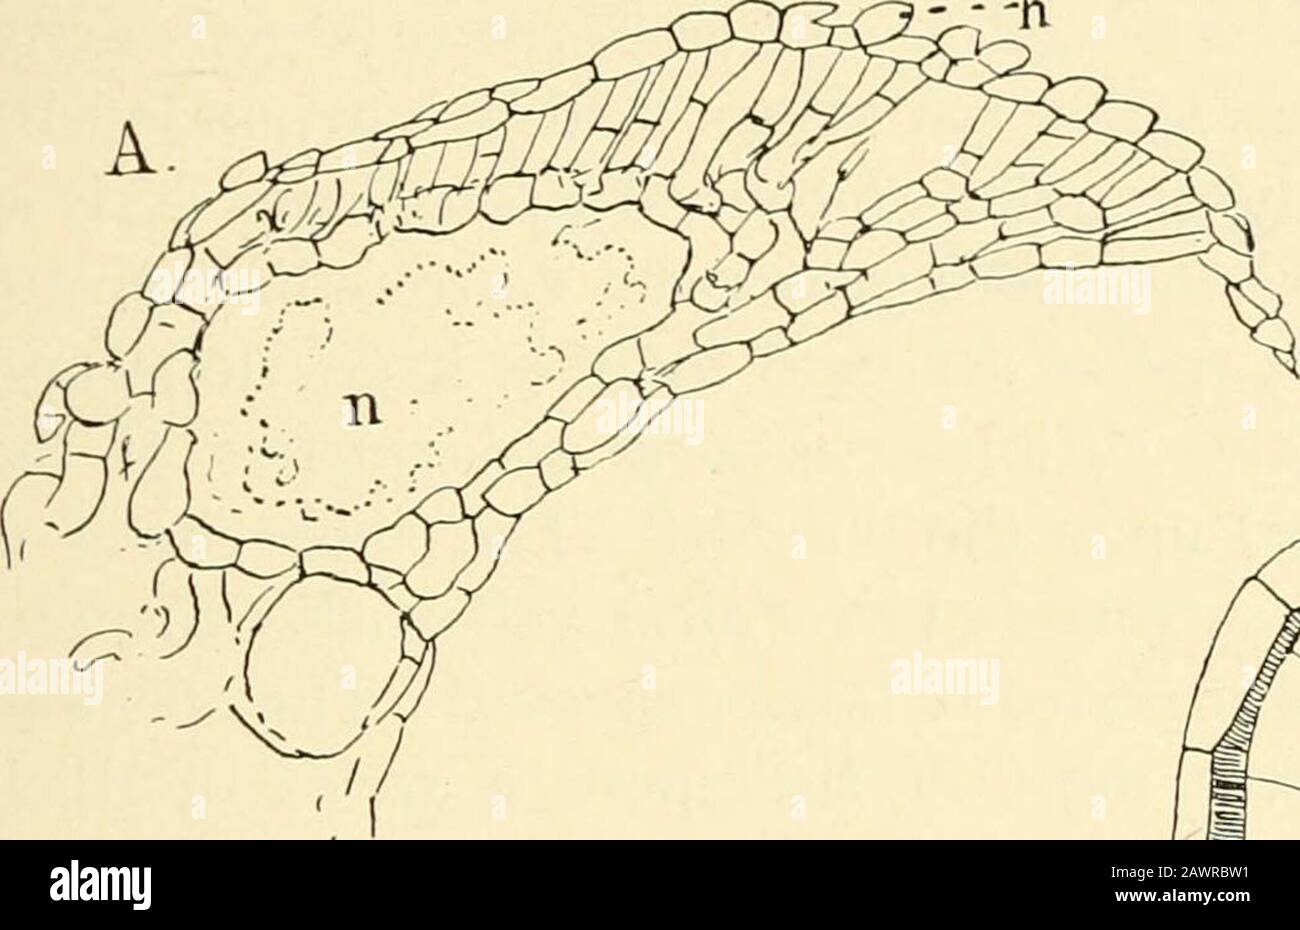 The structure & development of the mosses and ferns (Archegoniatae) . bservations in regard to the origin differ slightly from his inone respect. Instead of only a portion of the ventral lobegoing to form the sori, the whole lobe is devoted to the forma-tion of these, and the involucre which surrounds them is thereduced dorsal lobe of the leaf, and not part of the ventral one. ^ Strasburger (6), p. 52. XII LEPTOSPORANGIATAC HETEROSPOREAC 395 The leaf lobe, as soon as its first median division is complete,at once begins to form the sporocarps, each half becomingtransferred directly into its ini Stock Photo